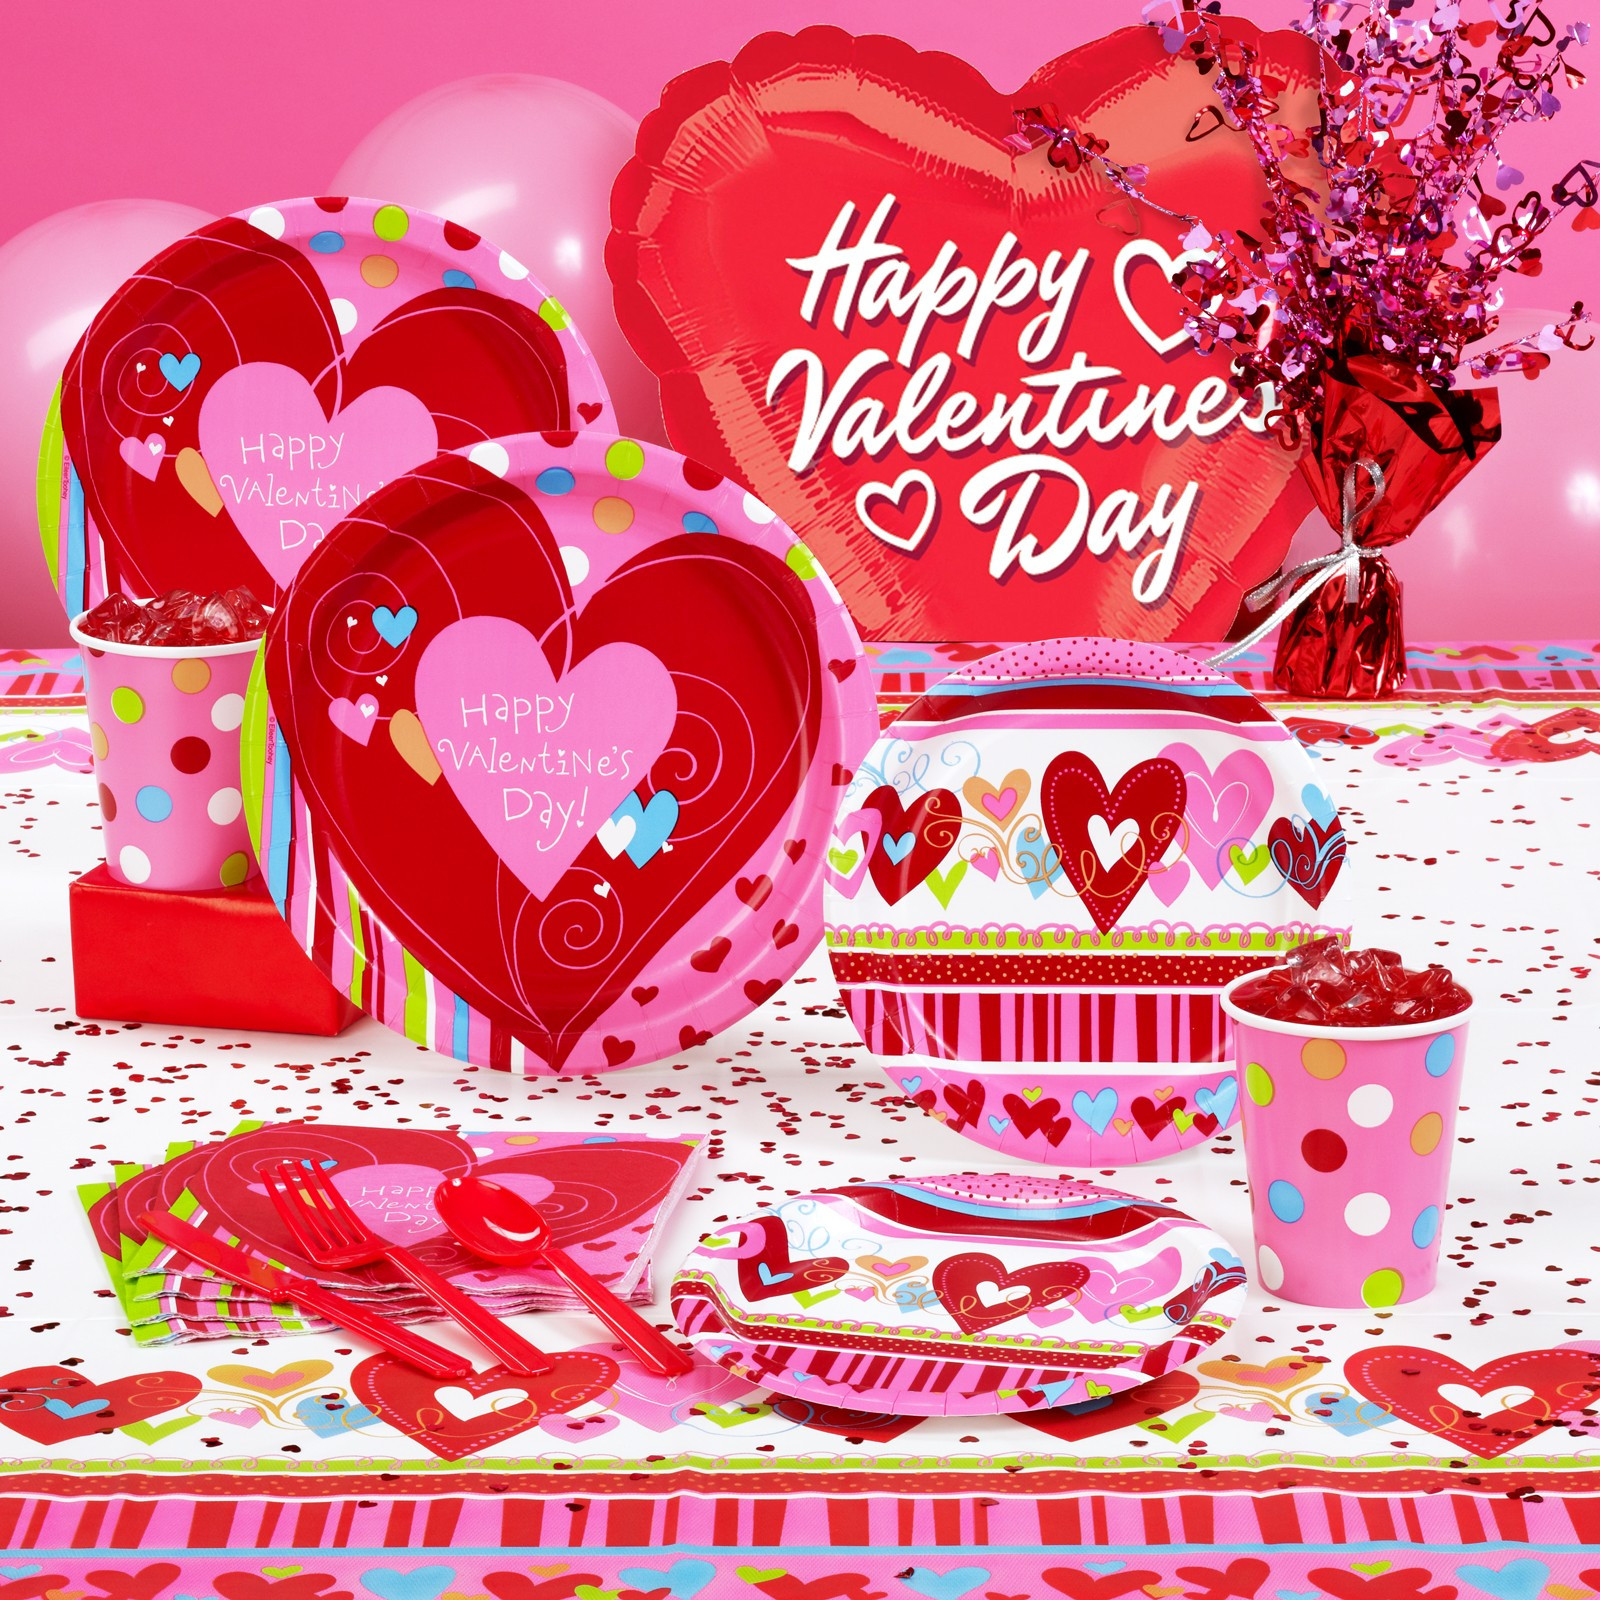 Valentines Day Party Decoration
 Best Valentines Day Party Ideas 2015